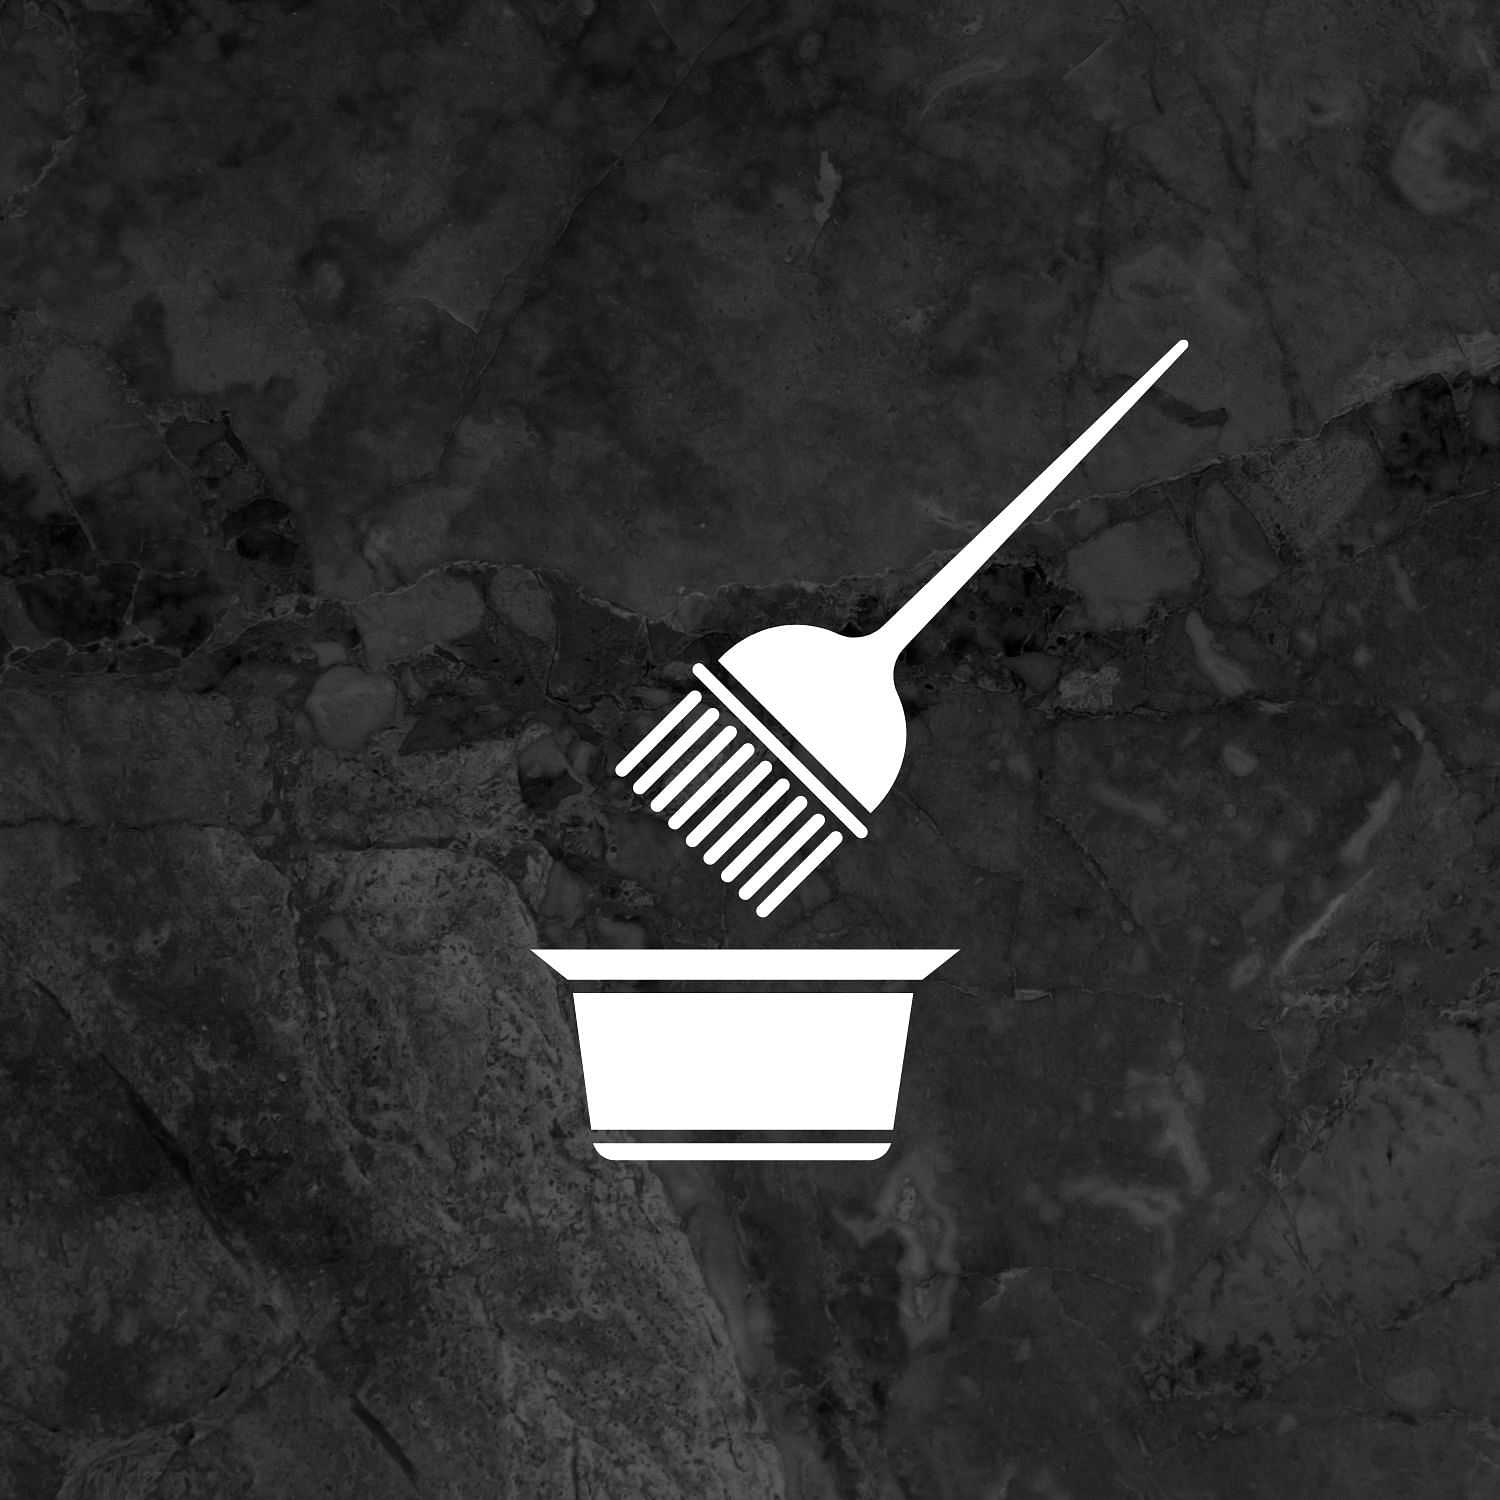 A fork over a takeout container icon on a dark marble background.